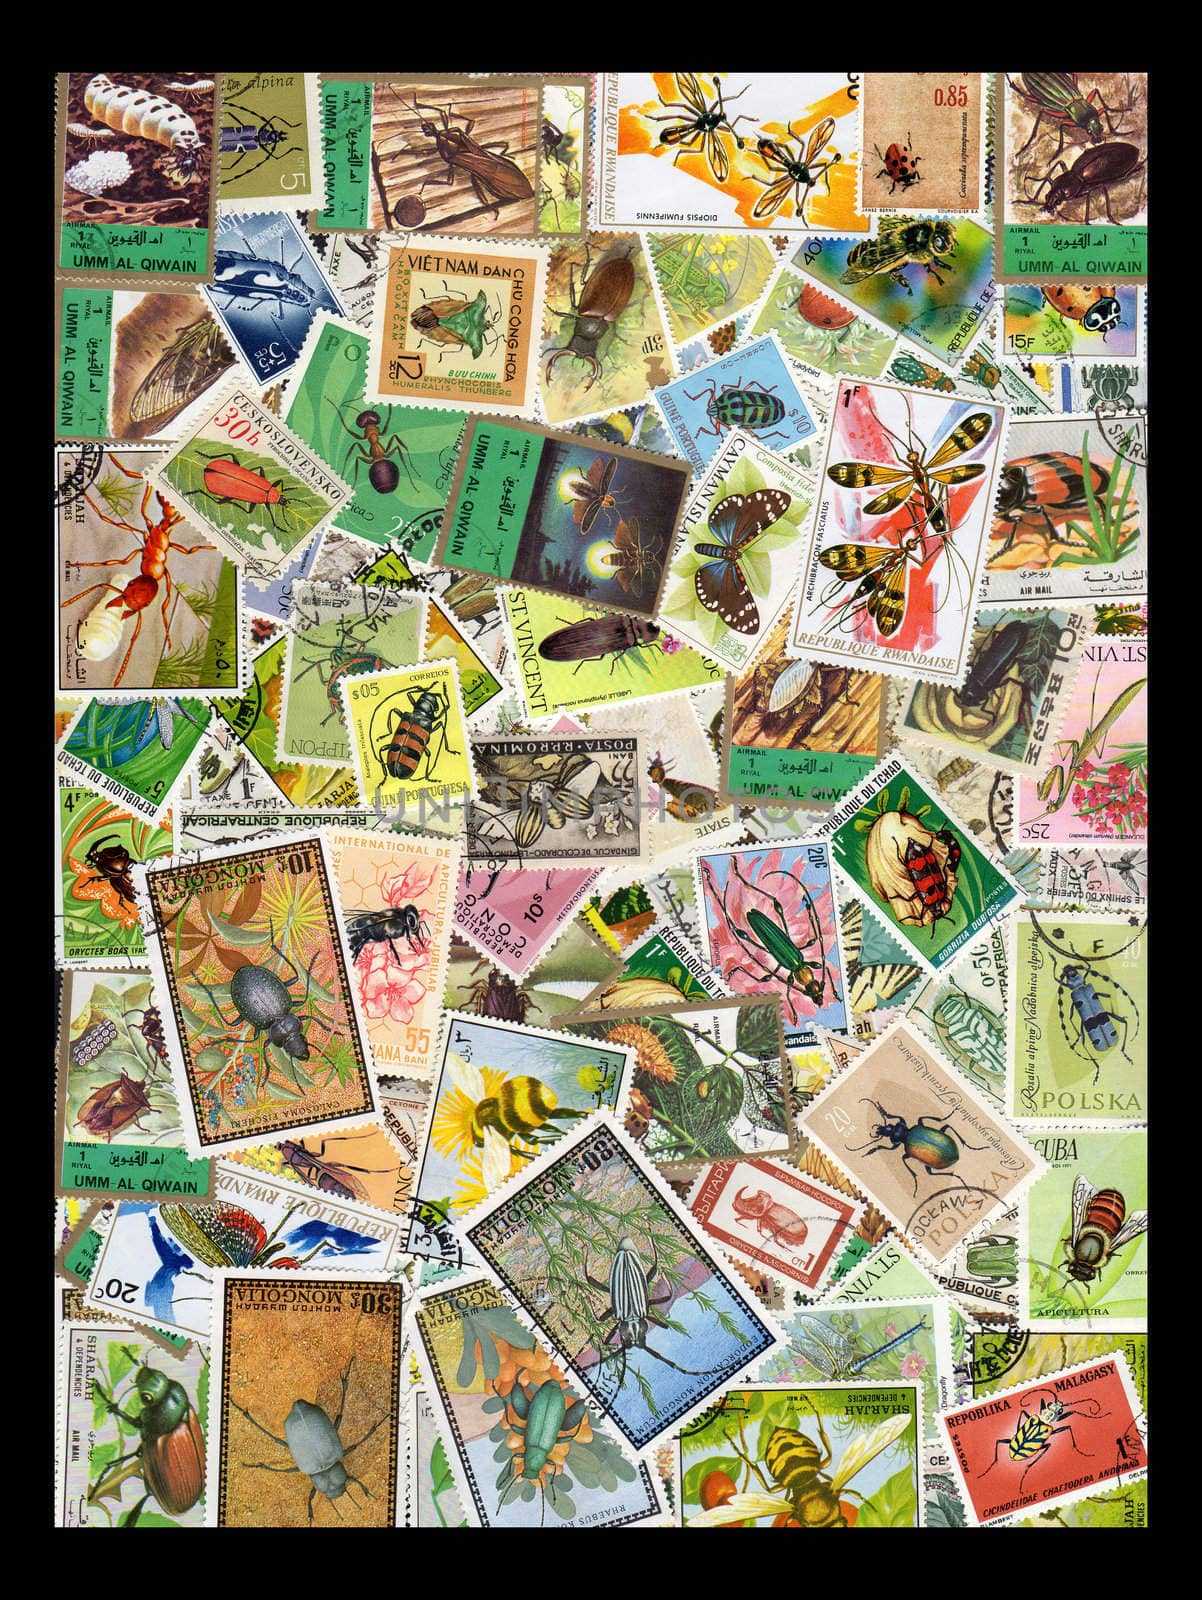 A collection of Thematic Postage Stamps of Insects,Beetles and other Bugs isolated on black